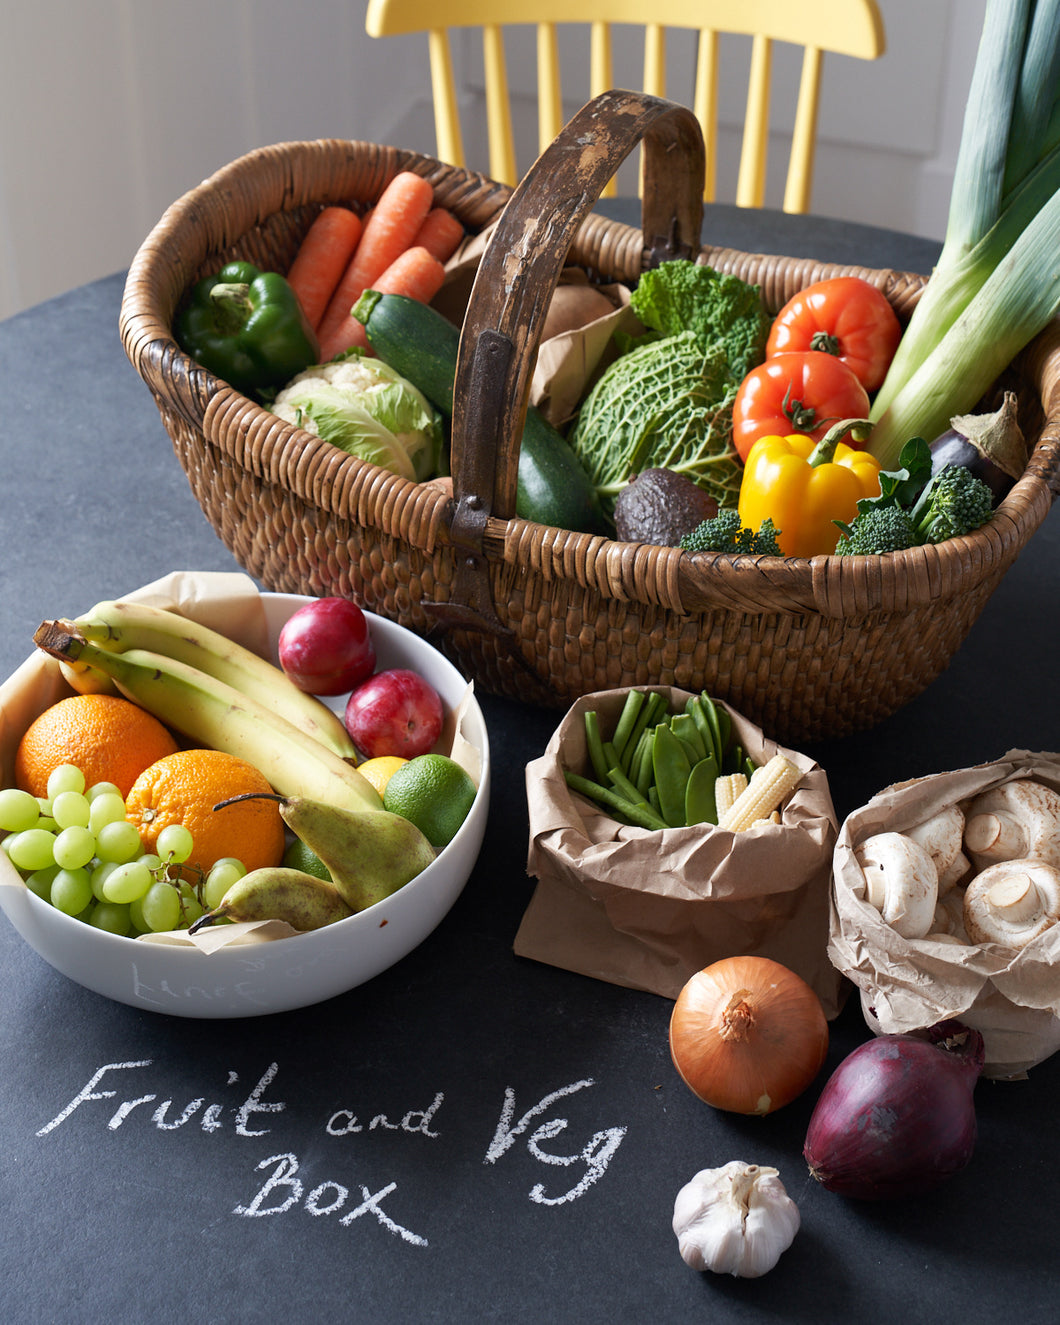 Our Fruit and Veg Box